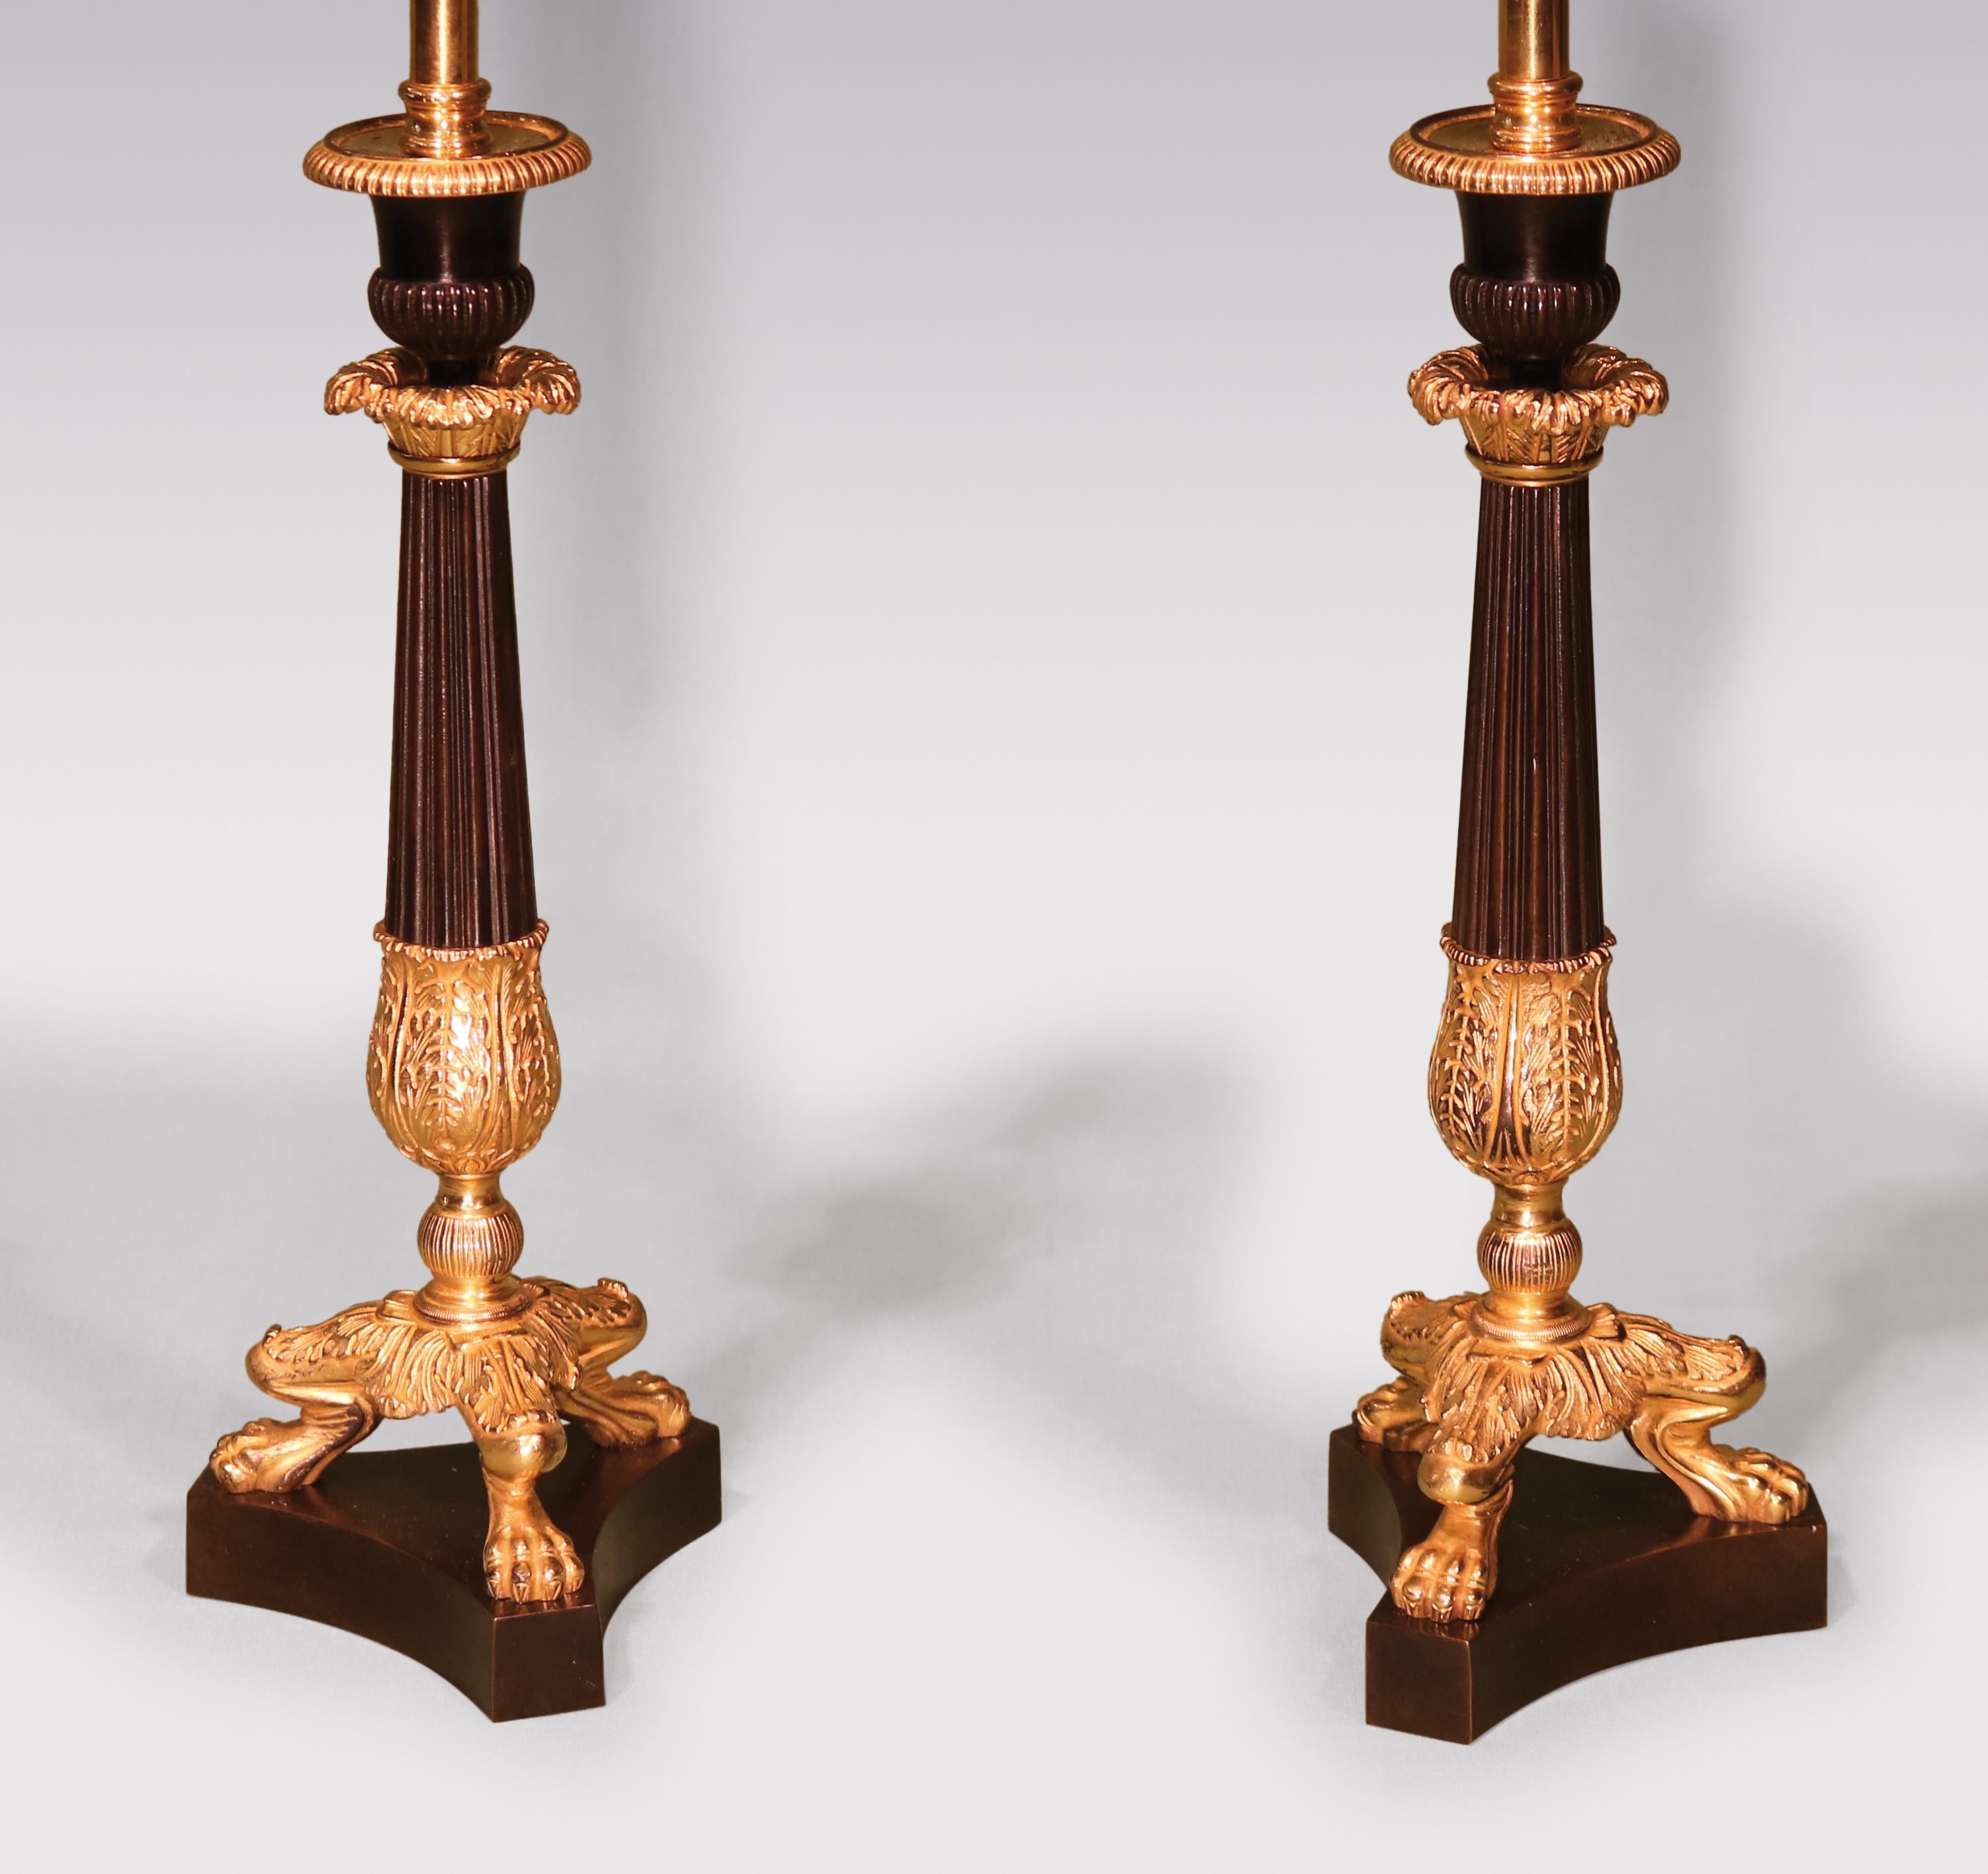 A pair of early 19th century bronze & ormolu fluted candlestick lamps having urn-shaped nozzles above reeded, tapering stems with acanthus leaf decoration, supported on well-cast lion’s paw feet ending on triform platform bases. Height of